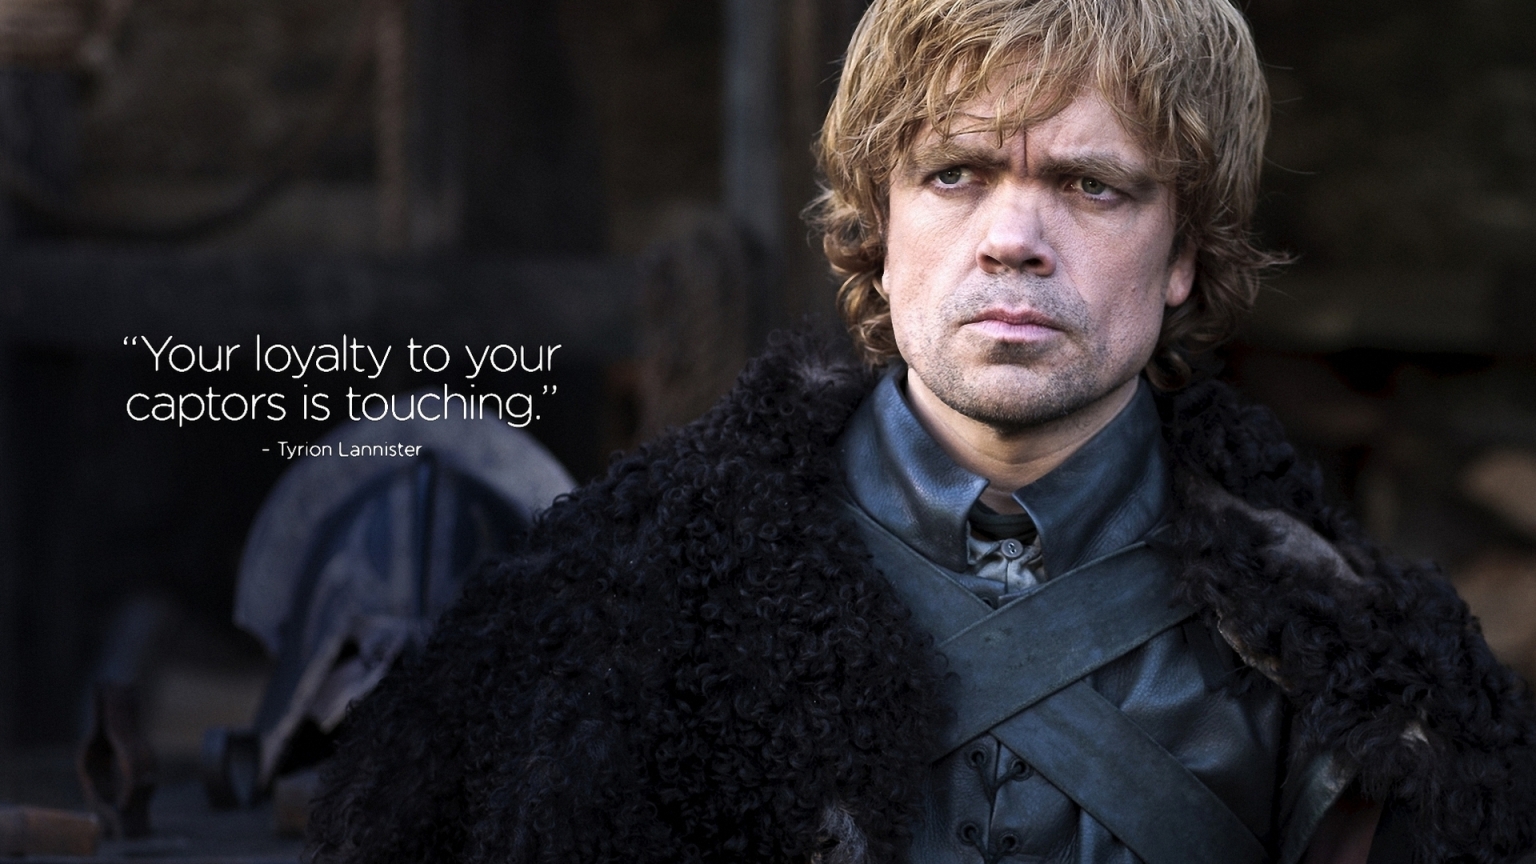 Tyrion Lannister Quote Game of Thrones for 1536 x 864 HDTV resolution